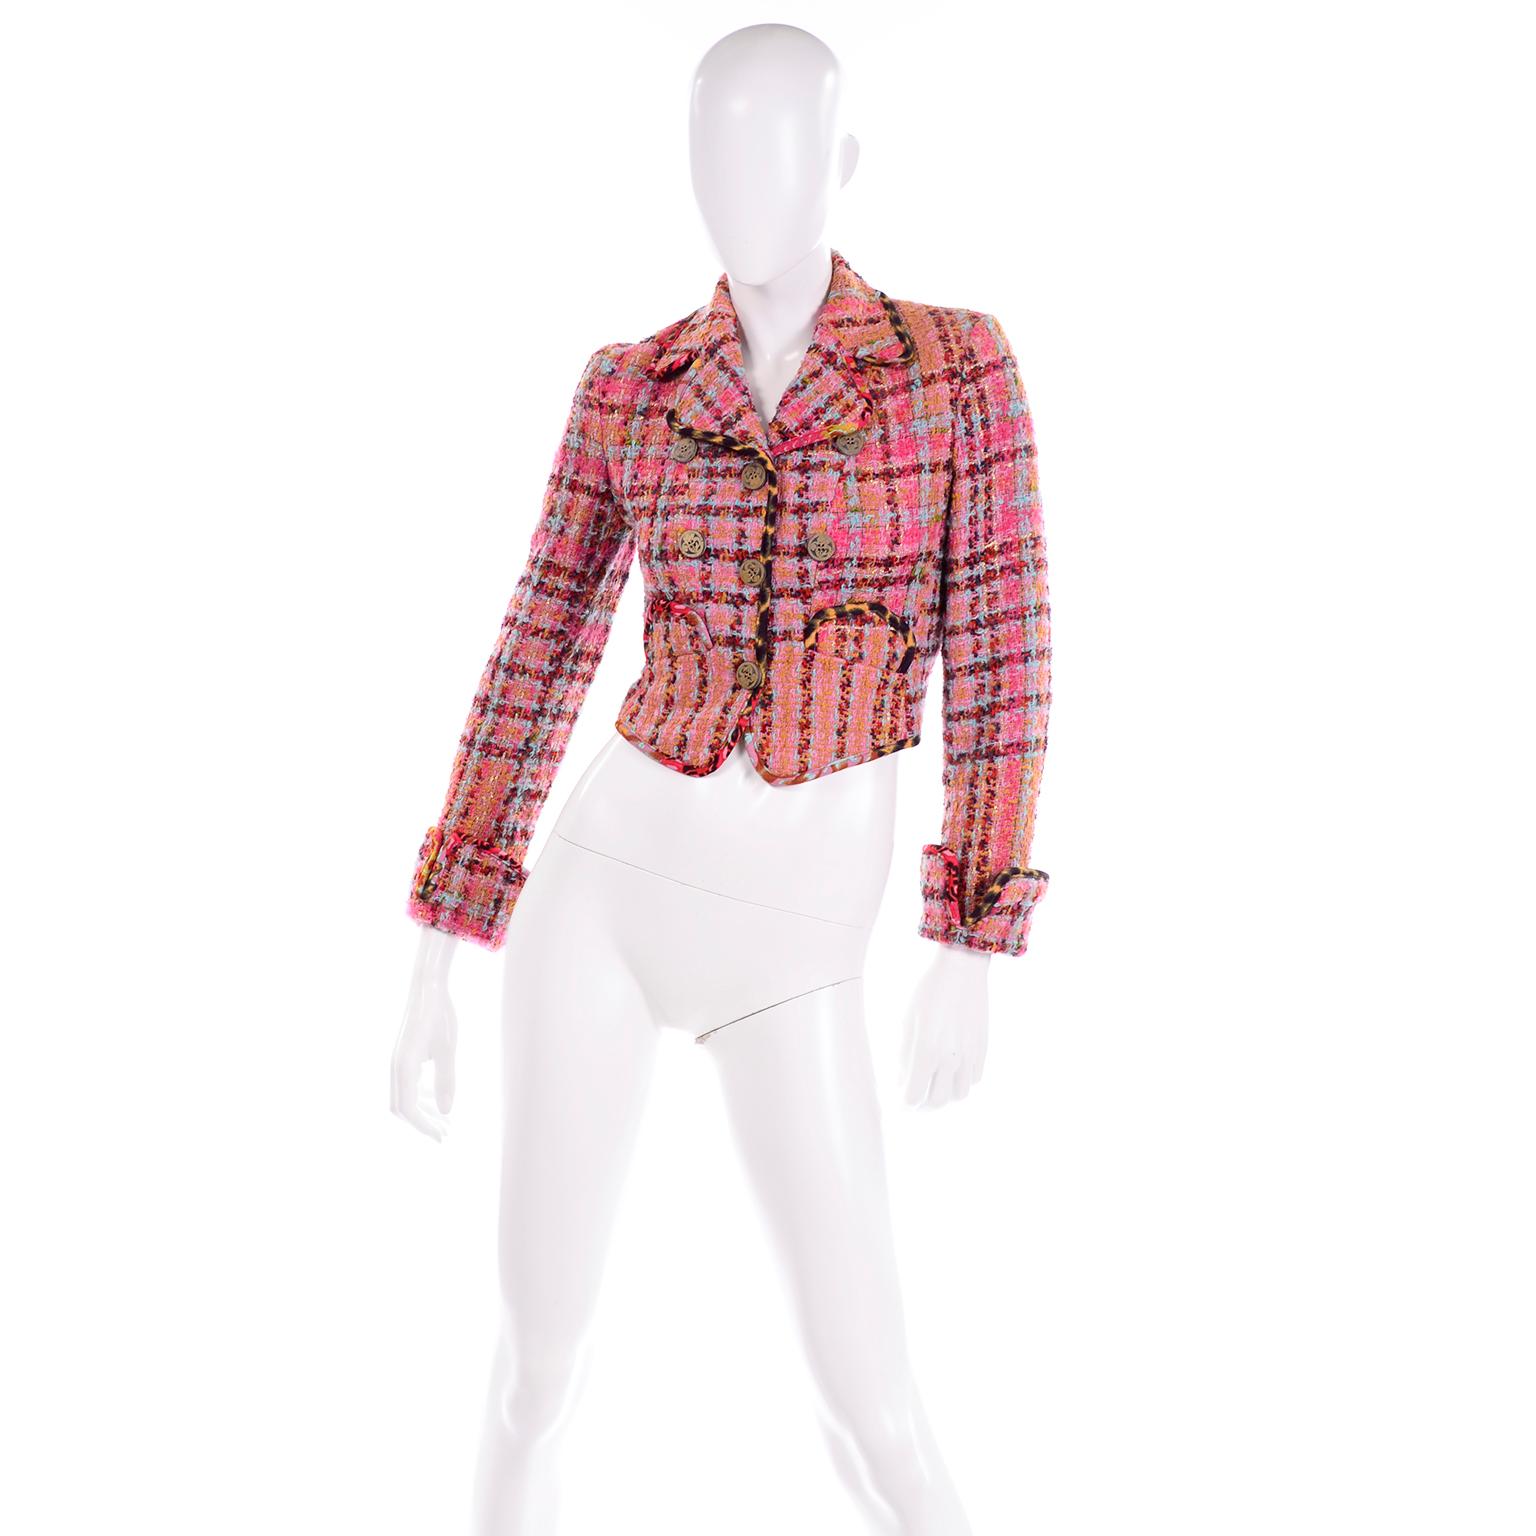 This is such a fun pink plaid blazer with the Bazar de Christian Lacroix label.This wonderful vintage jacket has a fun boucle windowpane weave, with mustard, baby blue, red, grey, and sparkling gold woven in with the pale pink and hot pink yard. It